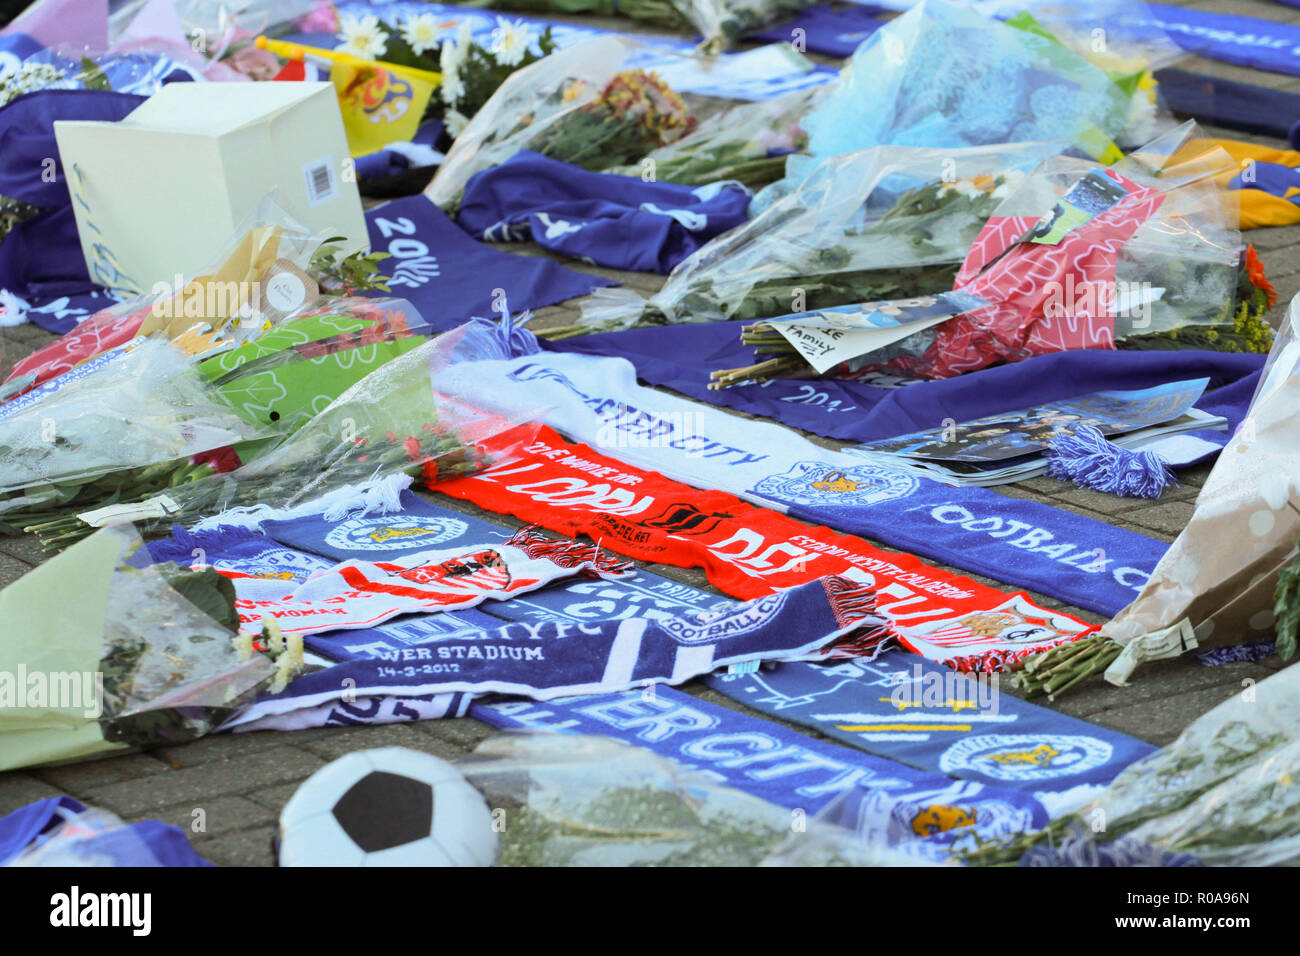 Flowers and club scurf's are seen lying on the ground during the tribute to the Leicester City chairman Vichai Srivaddhanaprabha who died in the helicopter crash. Stock Photo